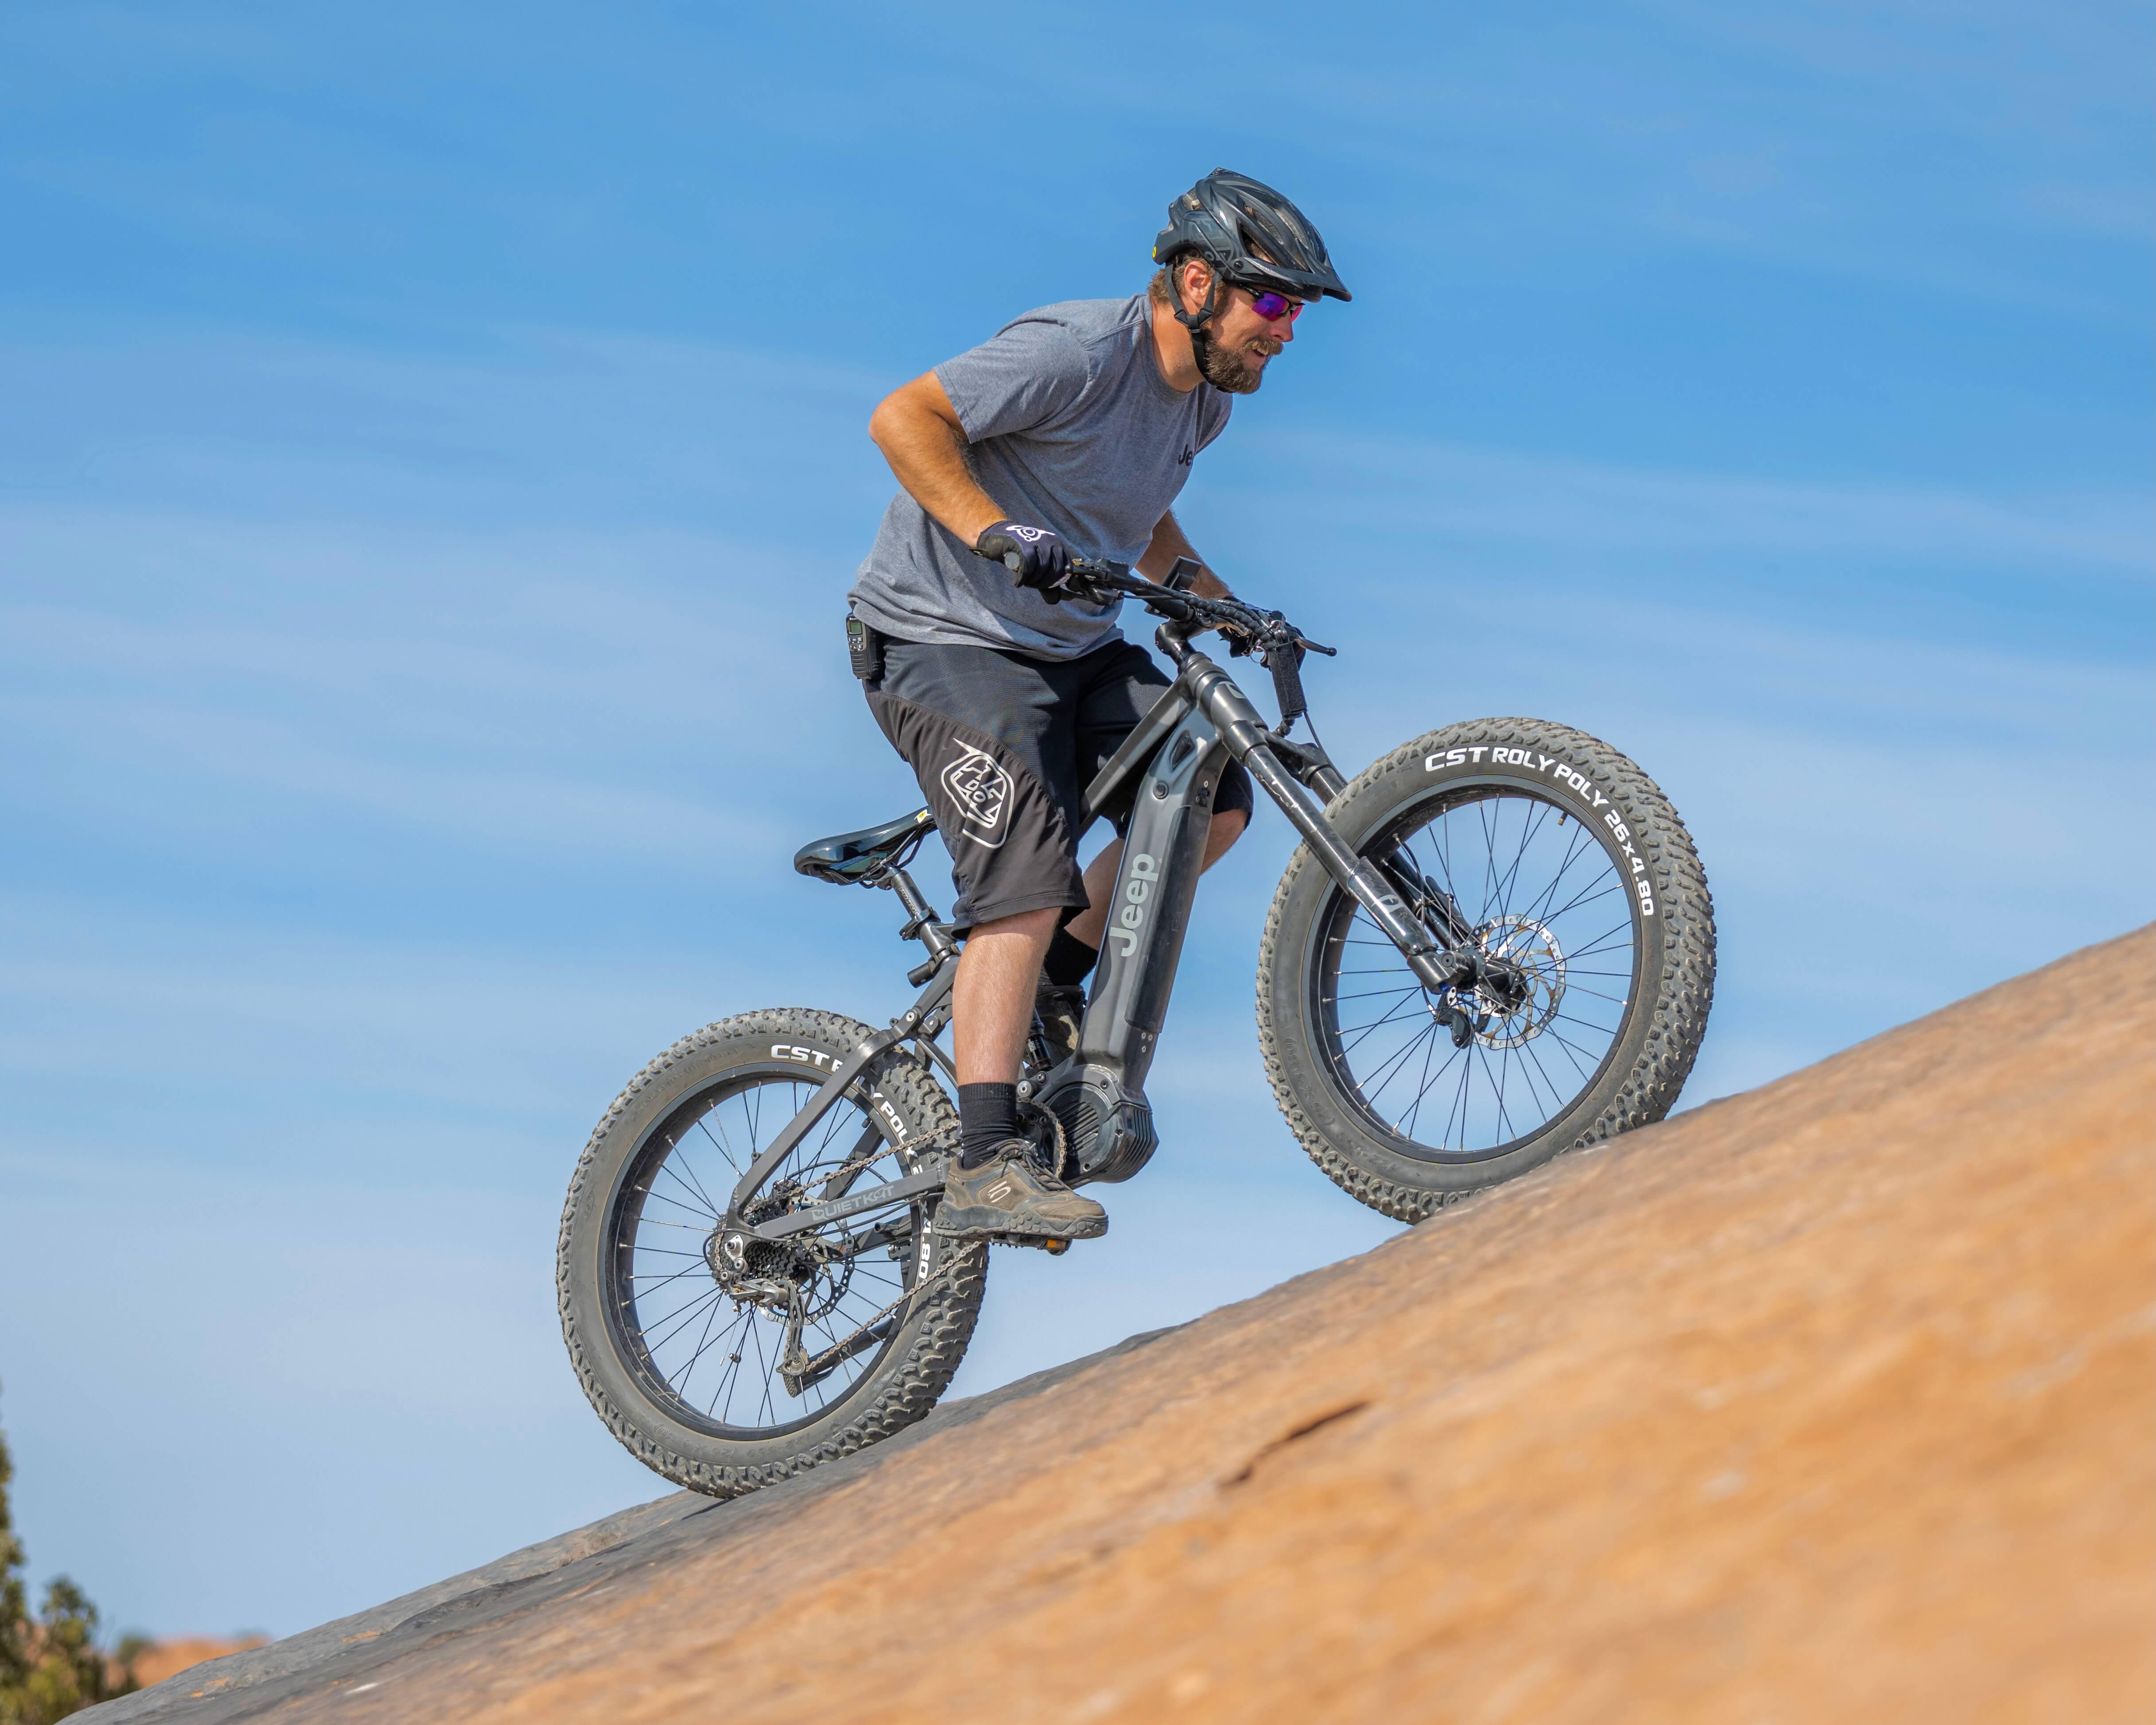 Are there any group activities or clubs for mountain e-bike enthusiasts?